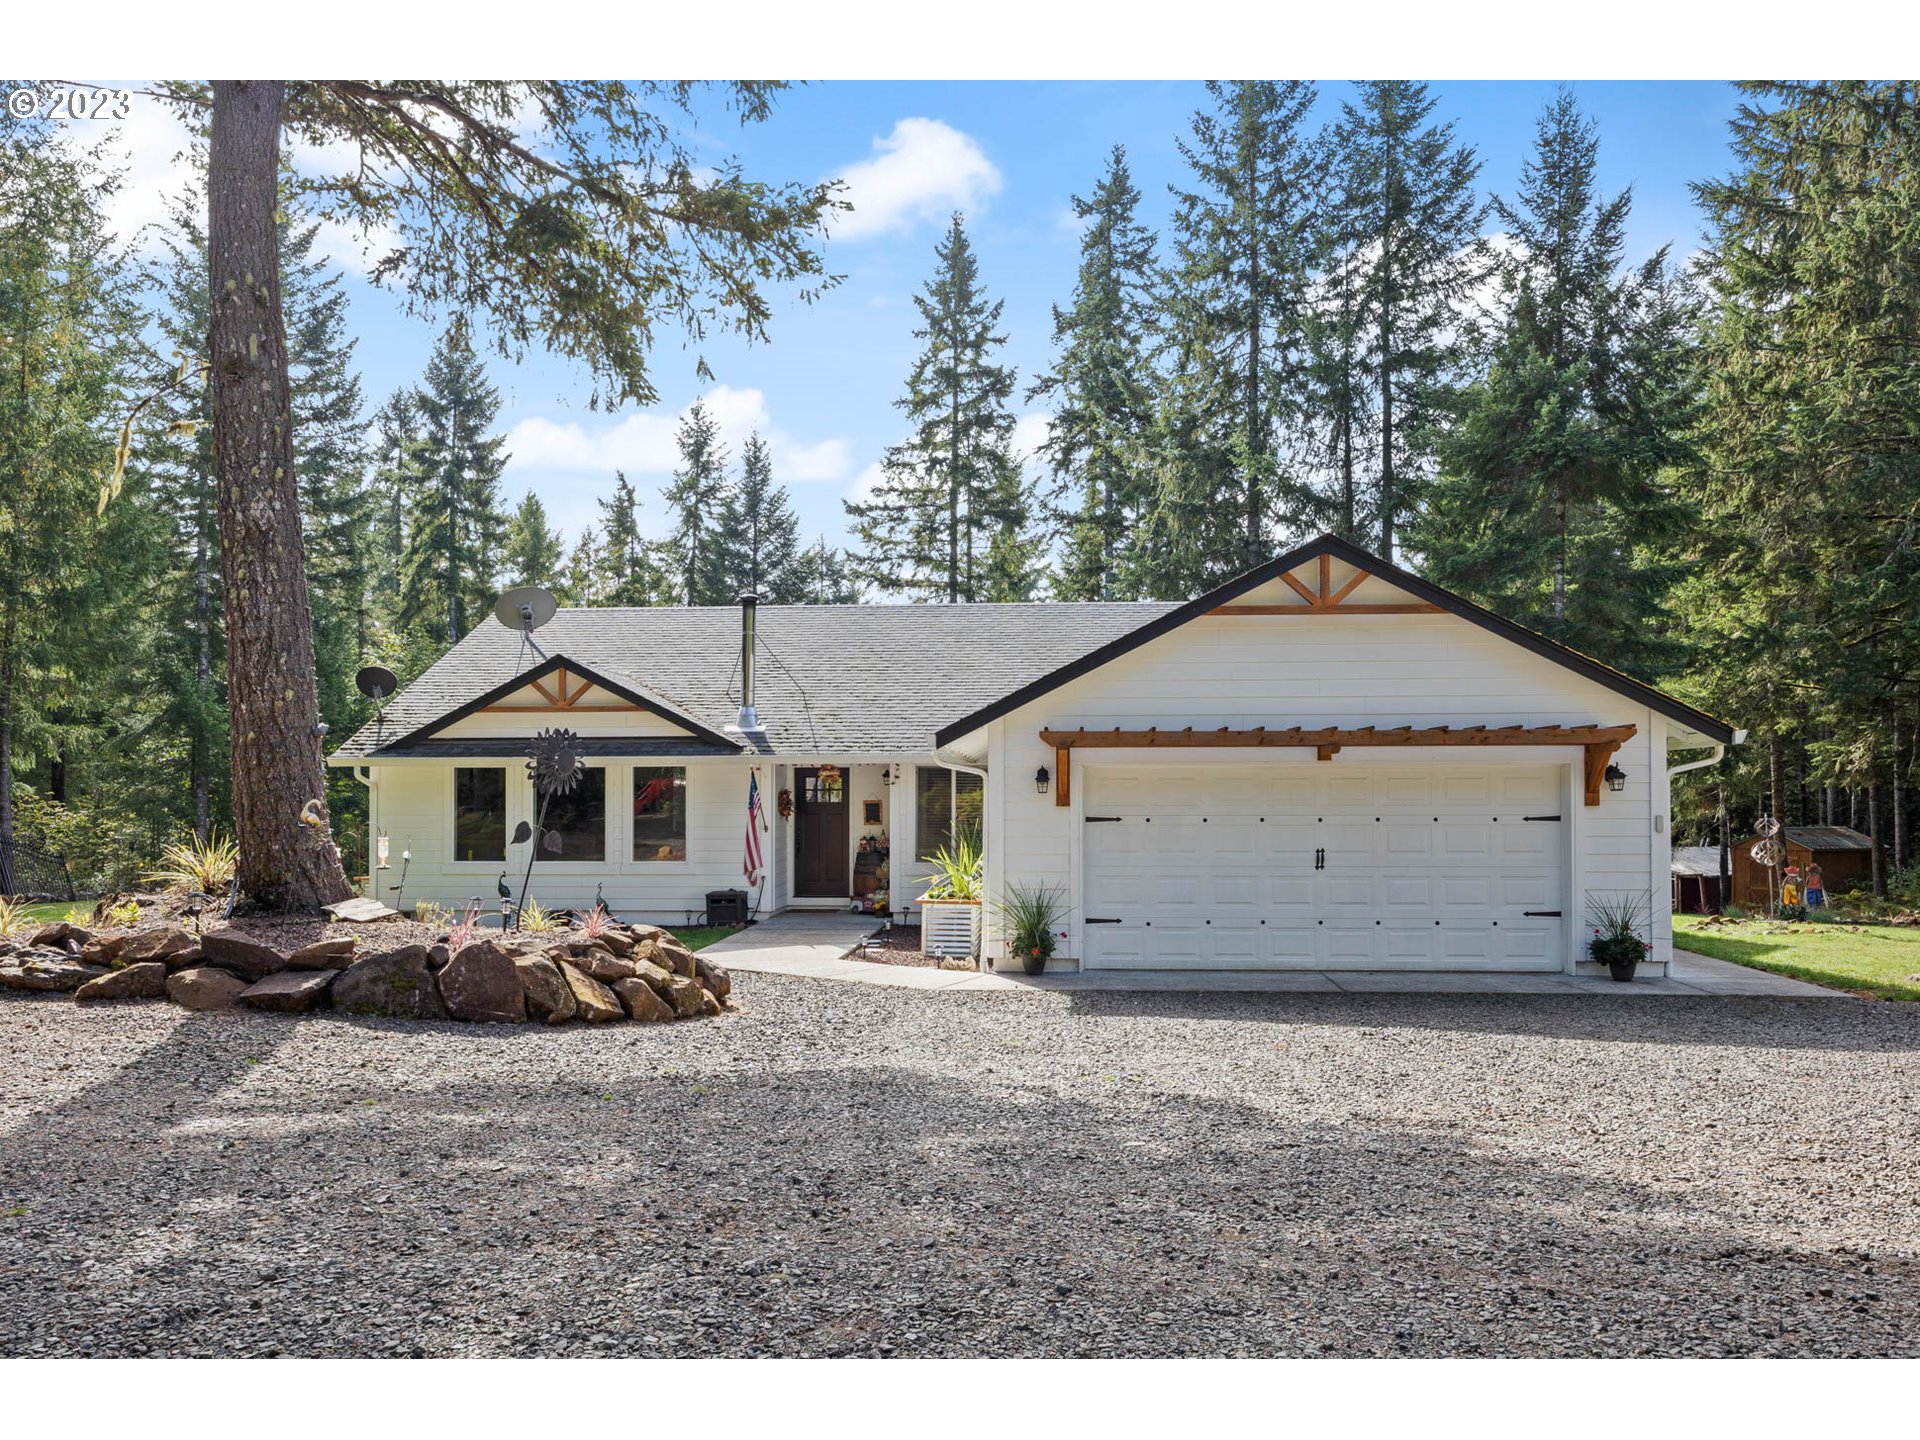 36565 PARSONS CREEK RD, Springfield, OR 